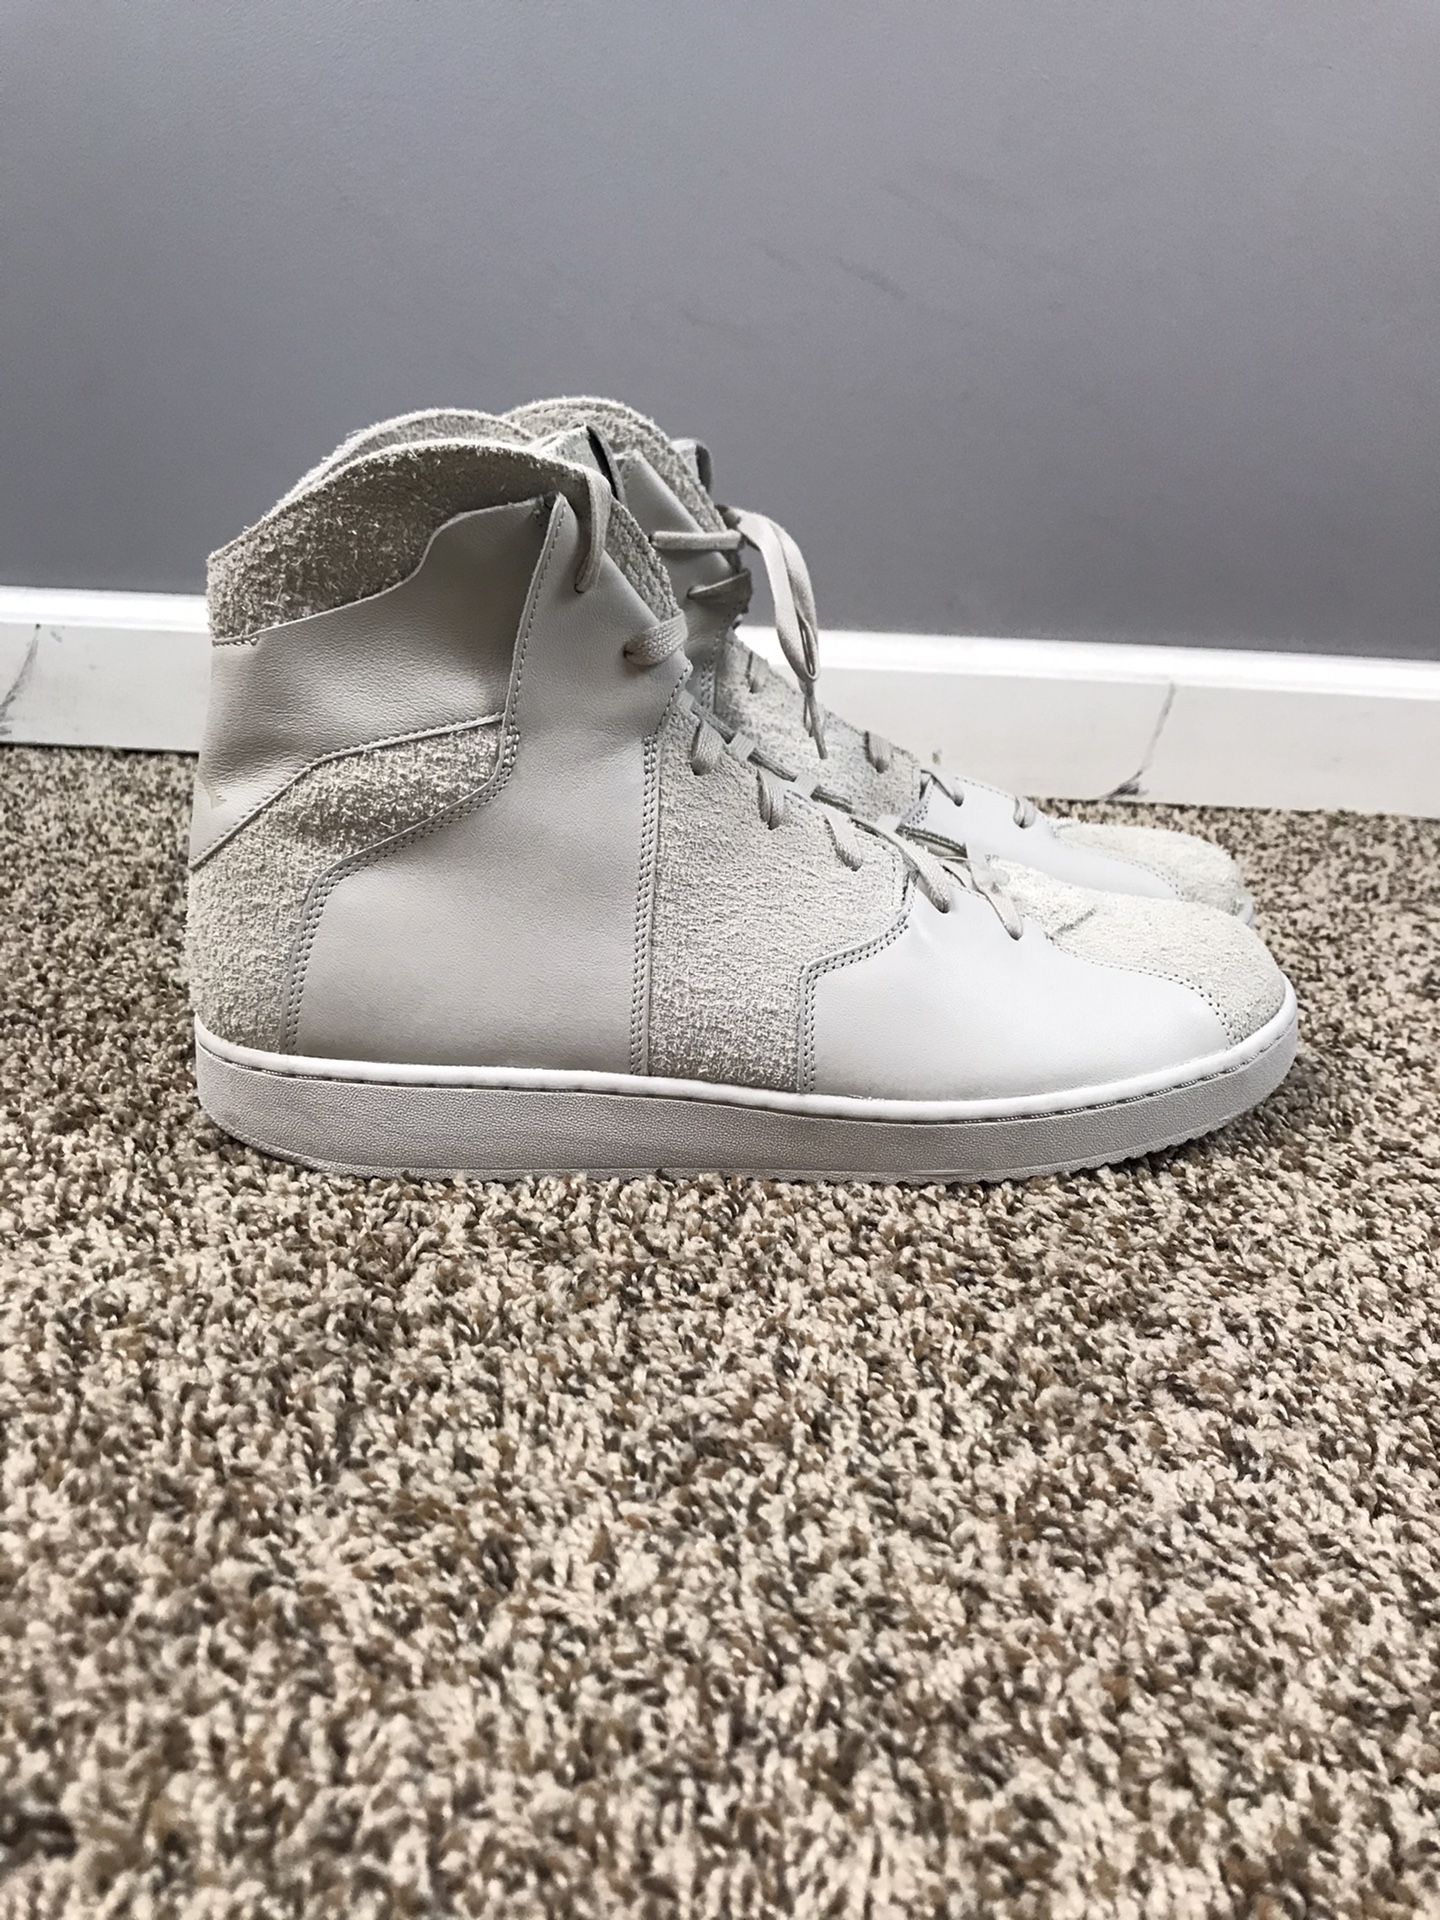 Men's 14 Nike Air Westbrook 0.2 Light Bone Lifestyle 854563-002 New without box for Sale in French Creek, WV OfferUp